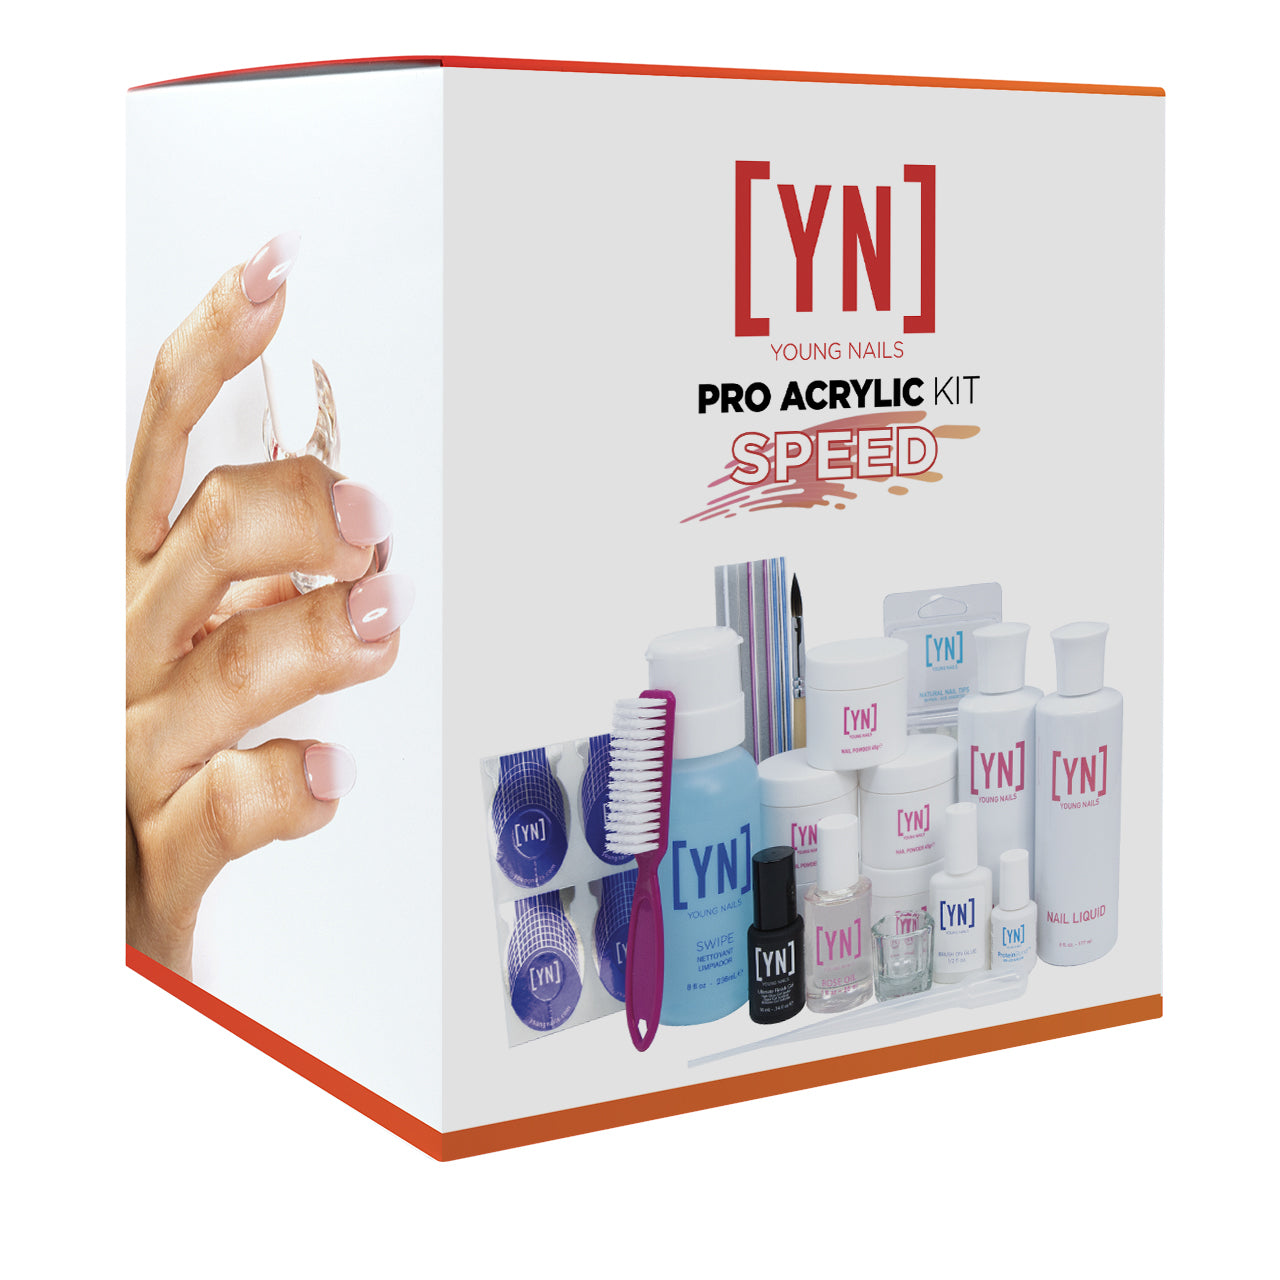 Young Nails - Pro Acrylic Kit Speed